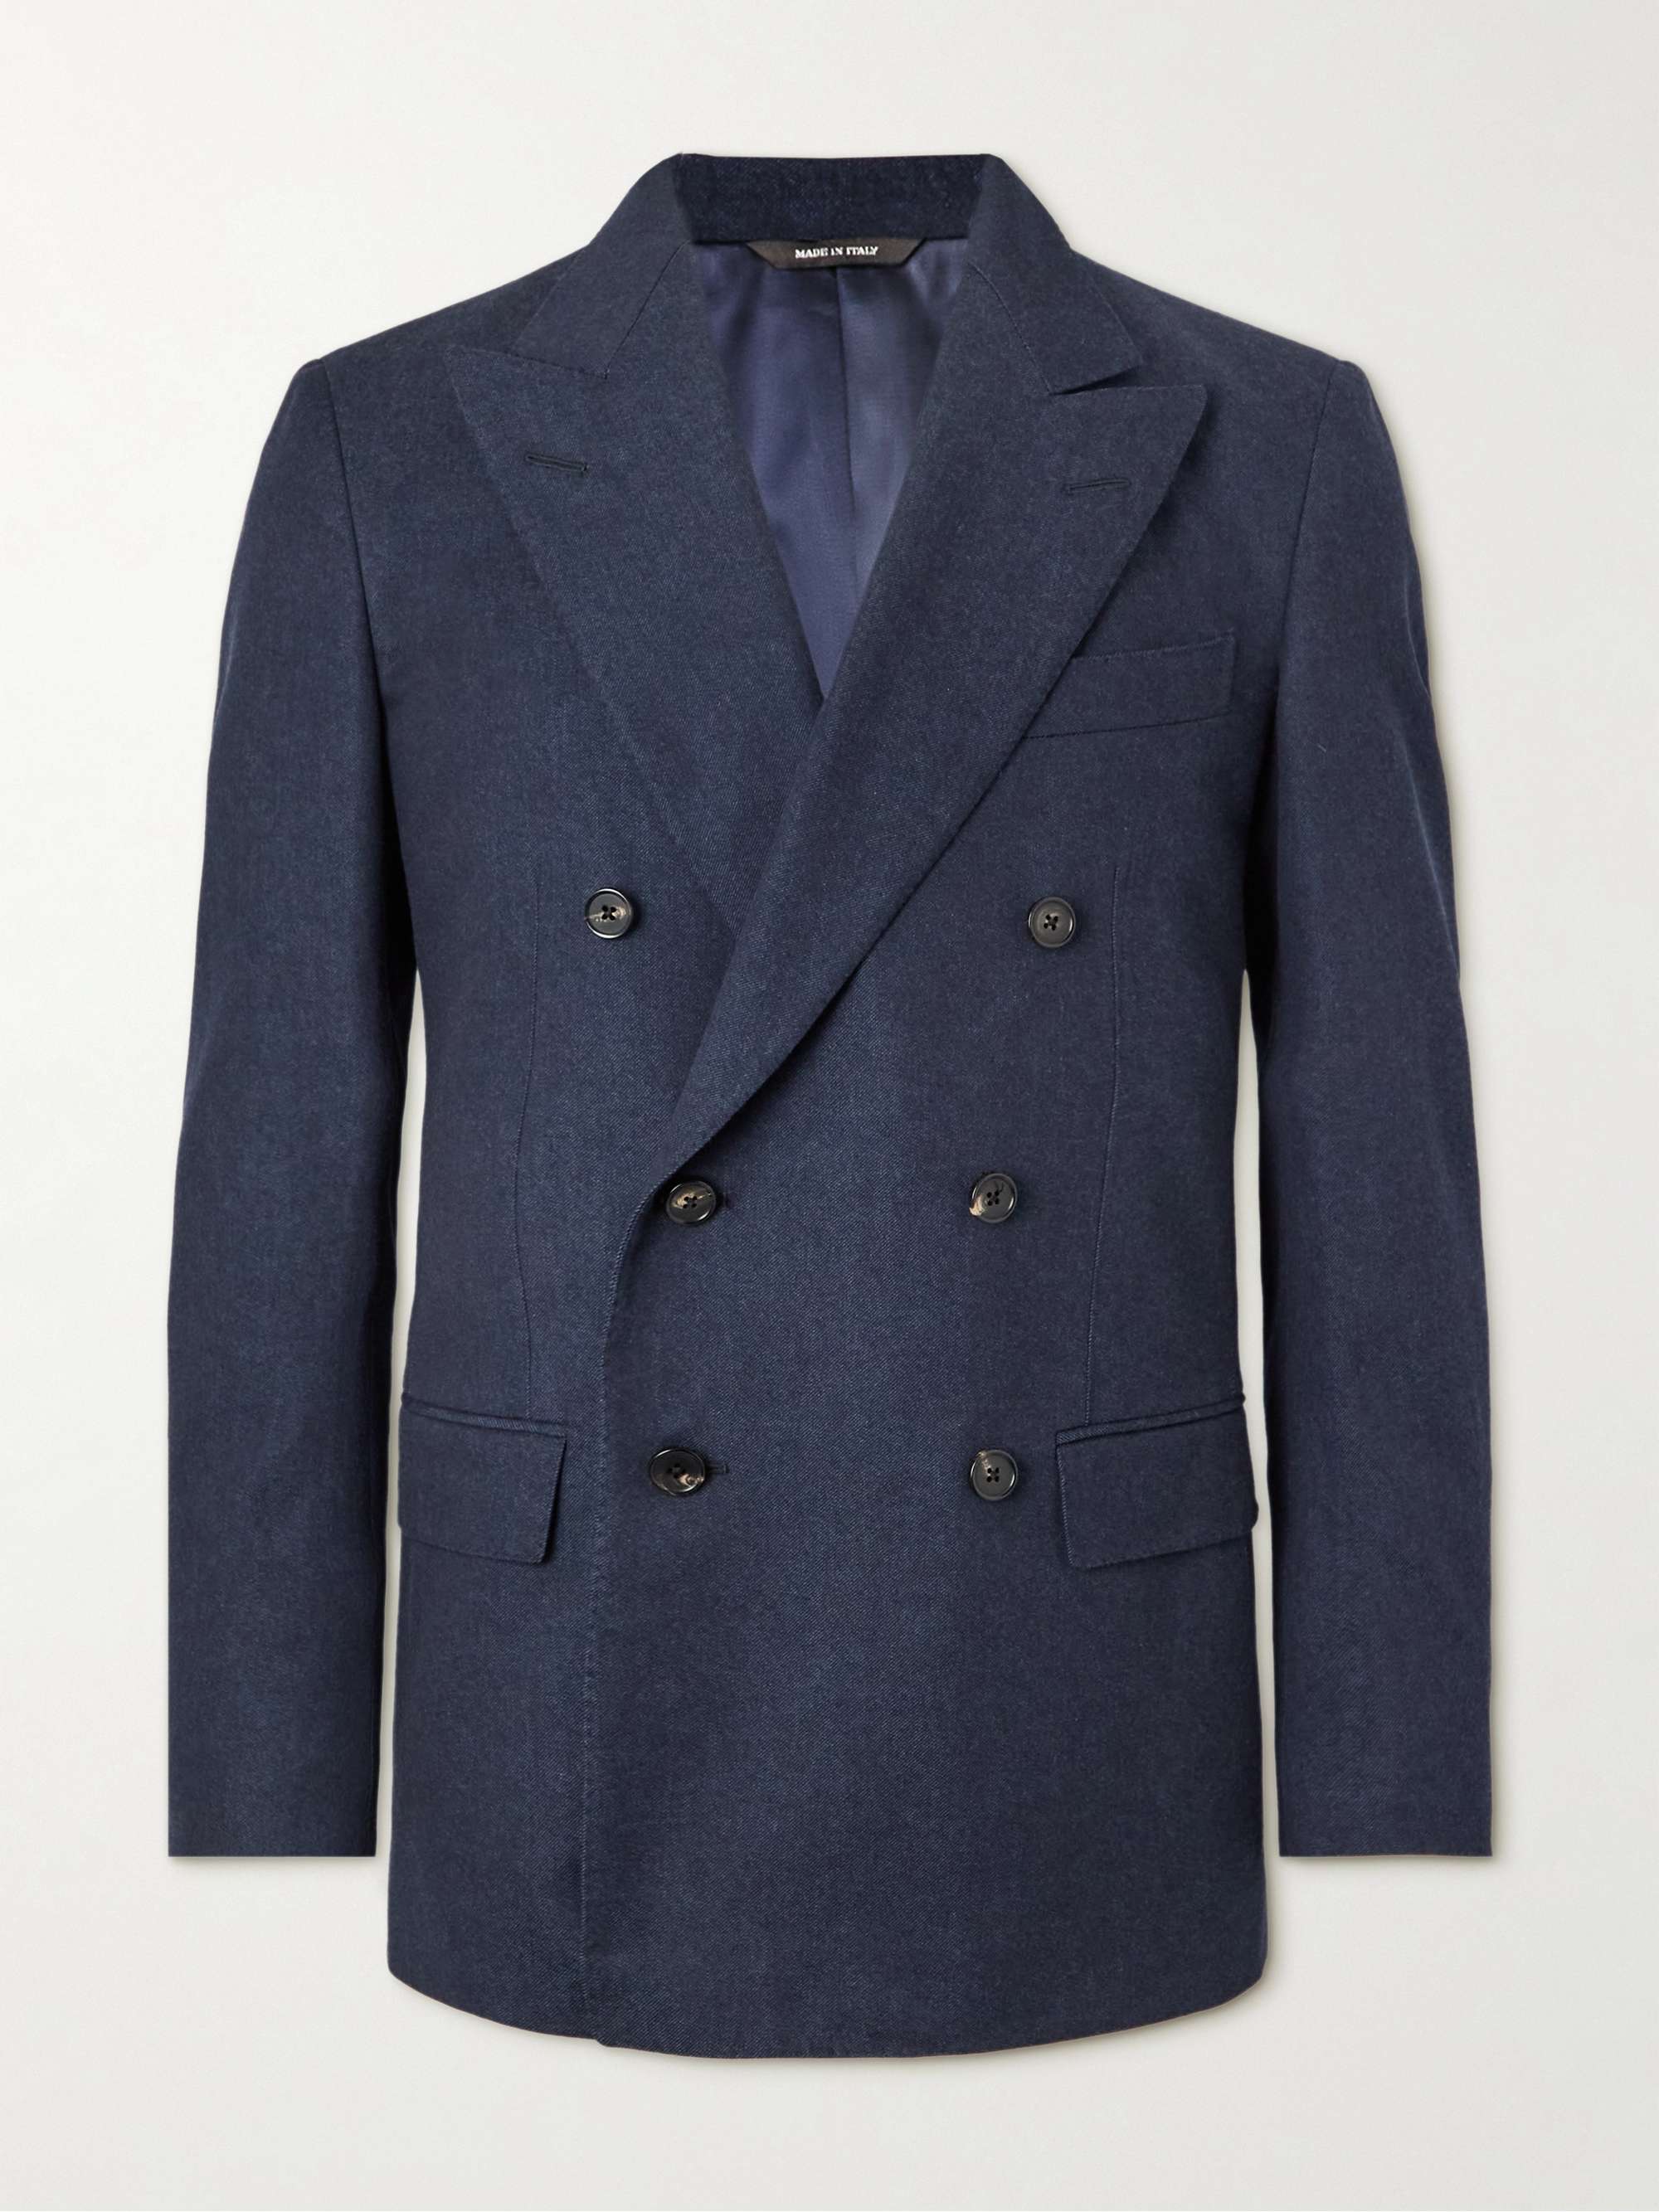 LORO PIANA Double-Breasted Wool, Cotton and Cashmere-Blend Twill Suit Jacket